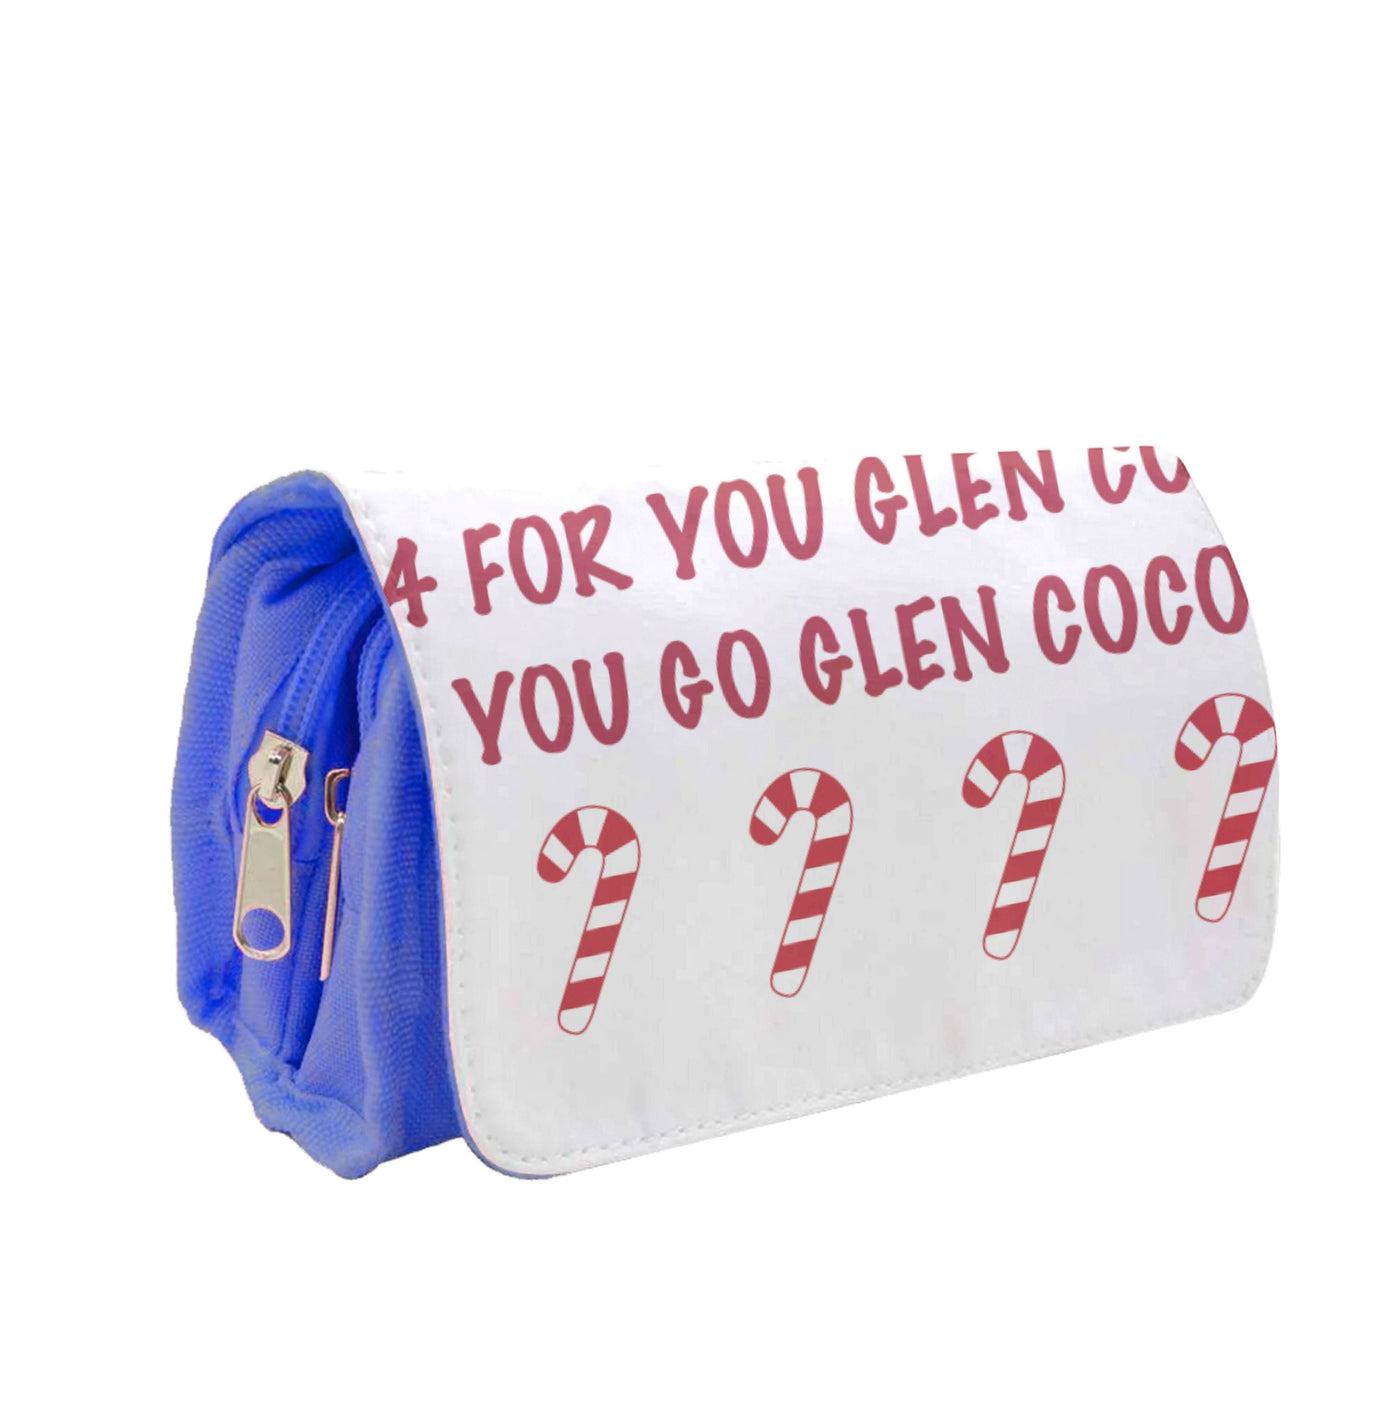 Four For You Glen Coco - Mean Girls Pencil Case